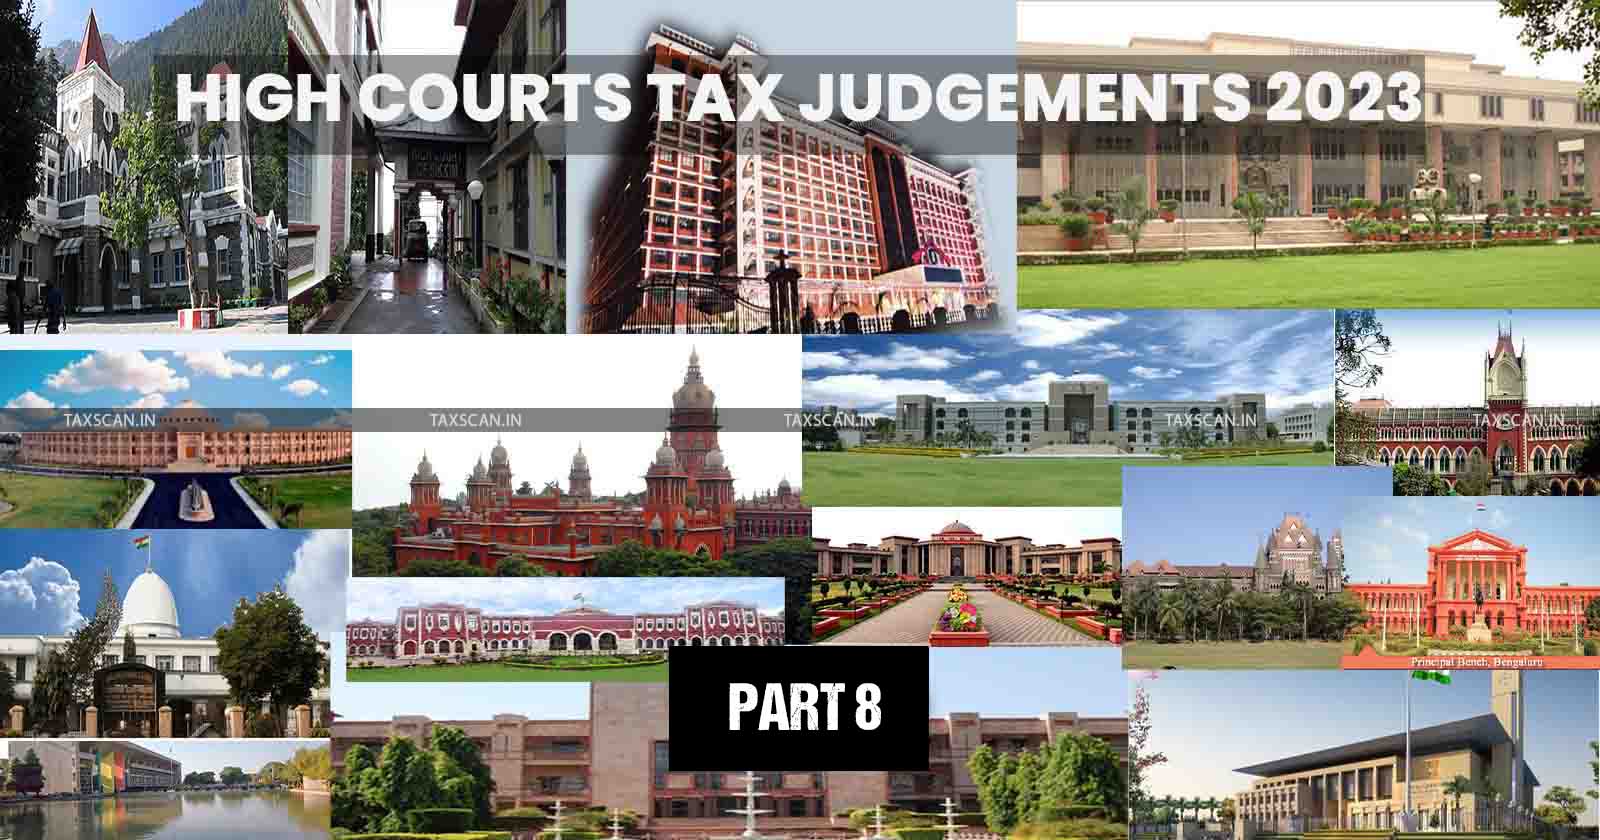 High Courts Annual Digest 2023 - Tax Judgments of High Courts - hc - high courts - Taxscan Annual Digest - Digest - TAXSCAN